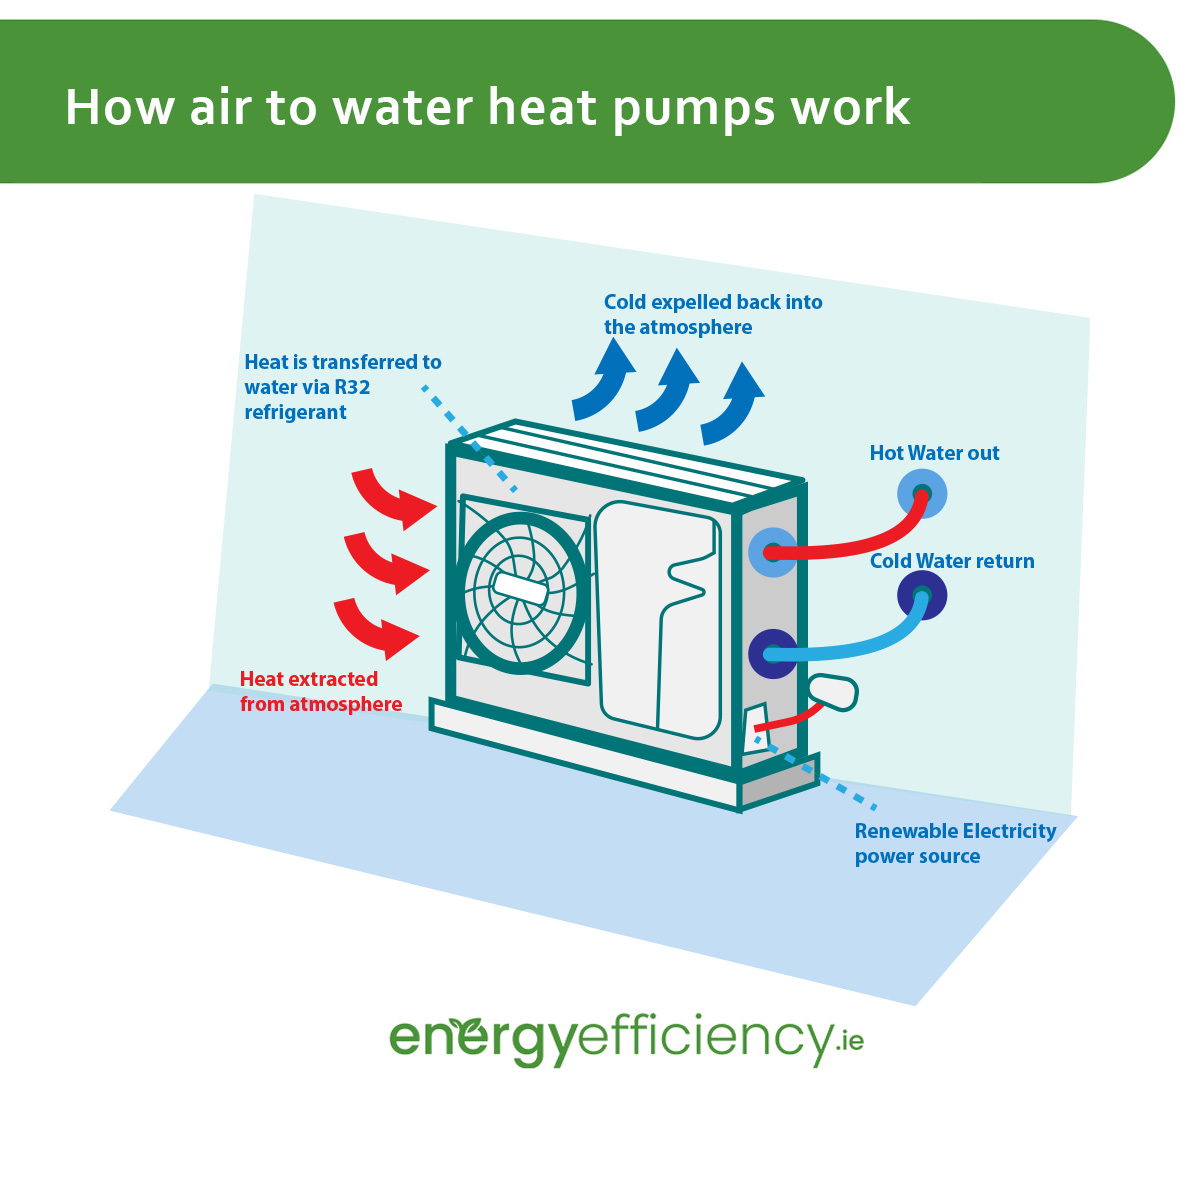 How Does an Air to Water Heat Pump Work